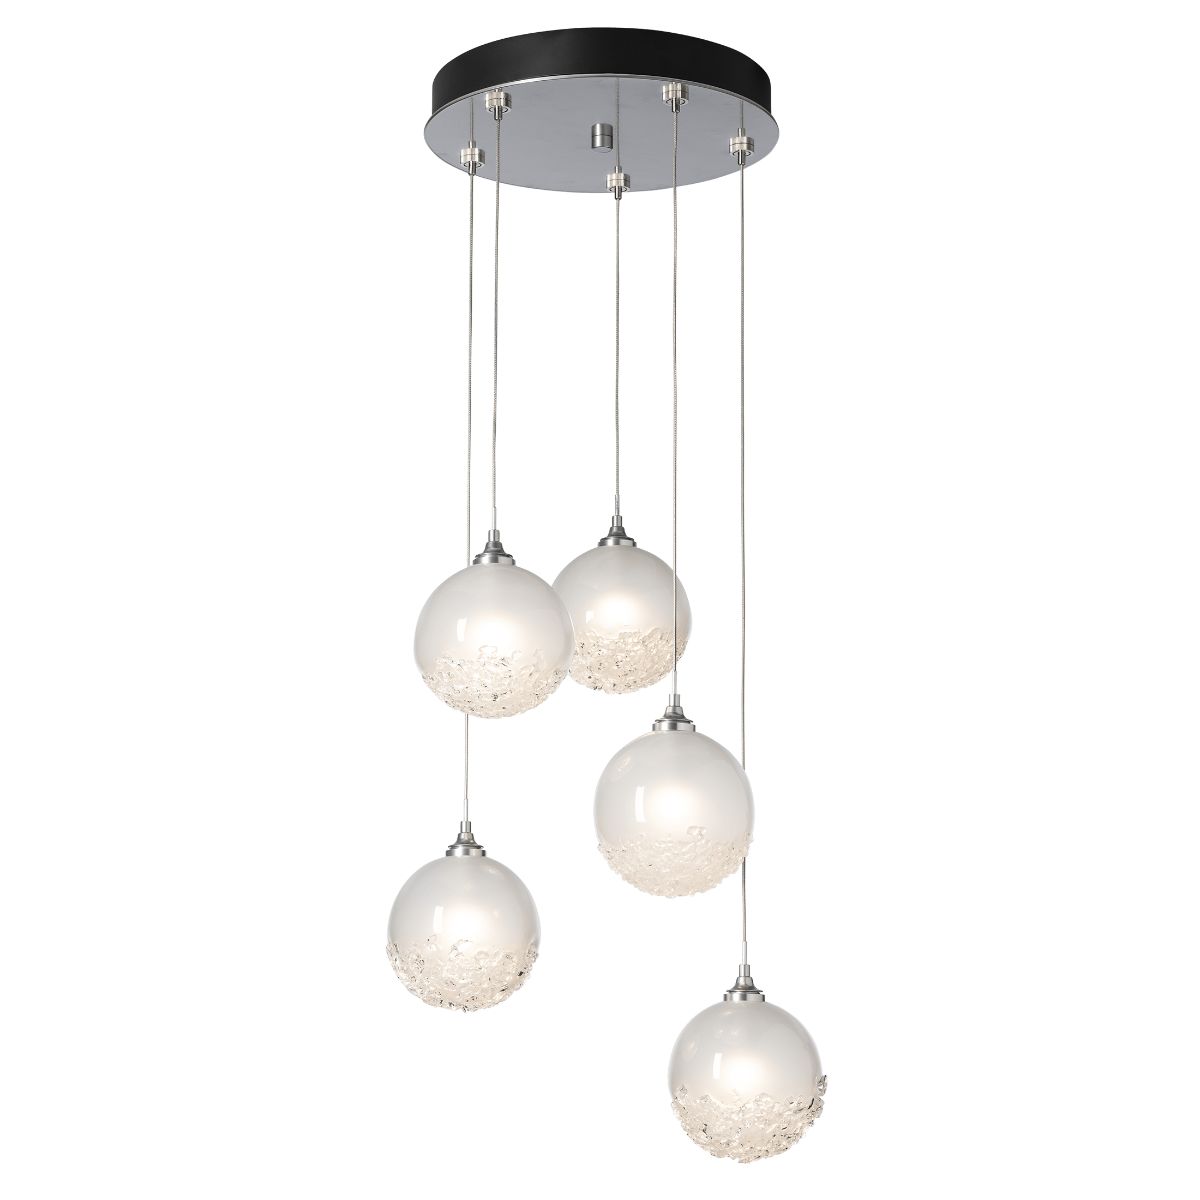 Fritz 5 lights Pendant Light with Long Height